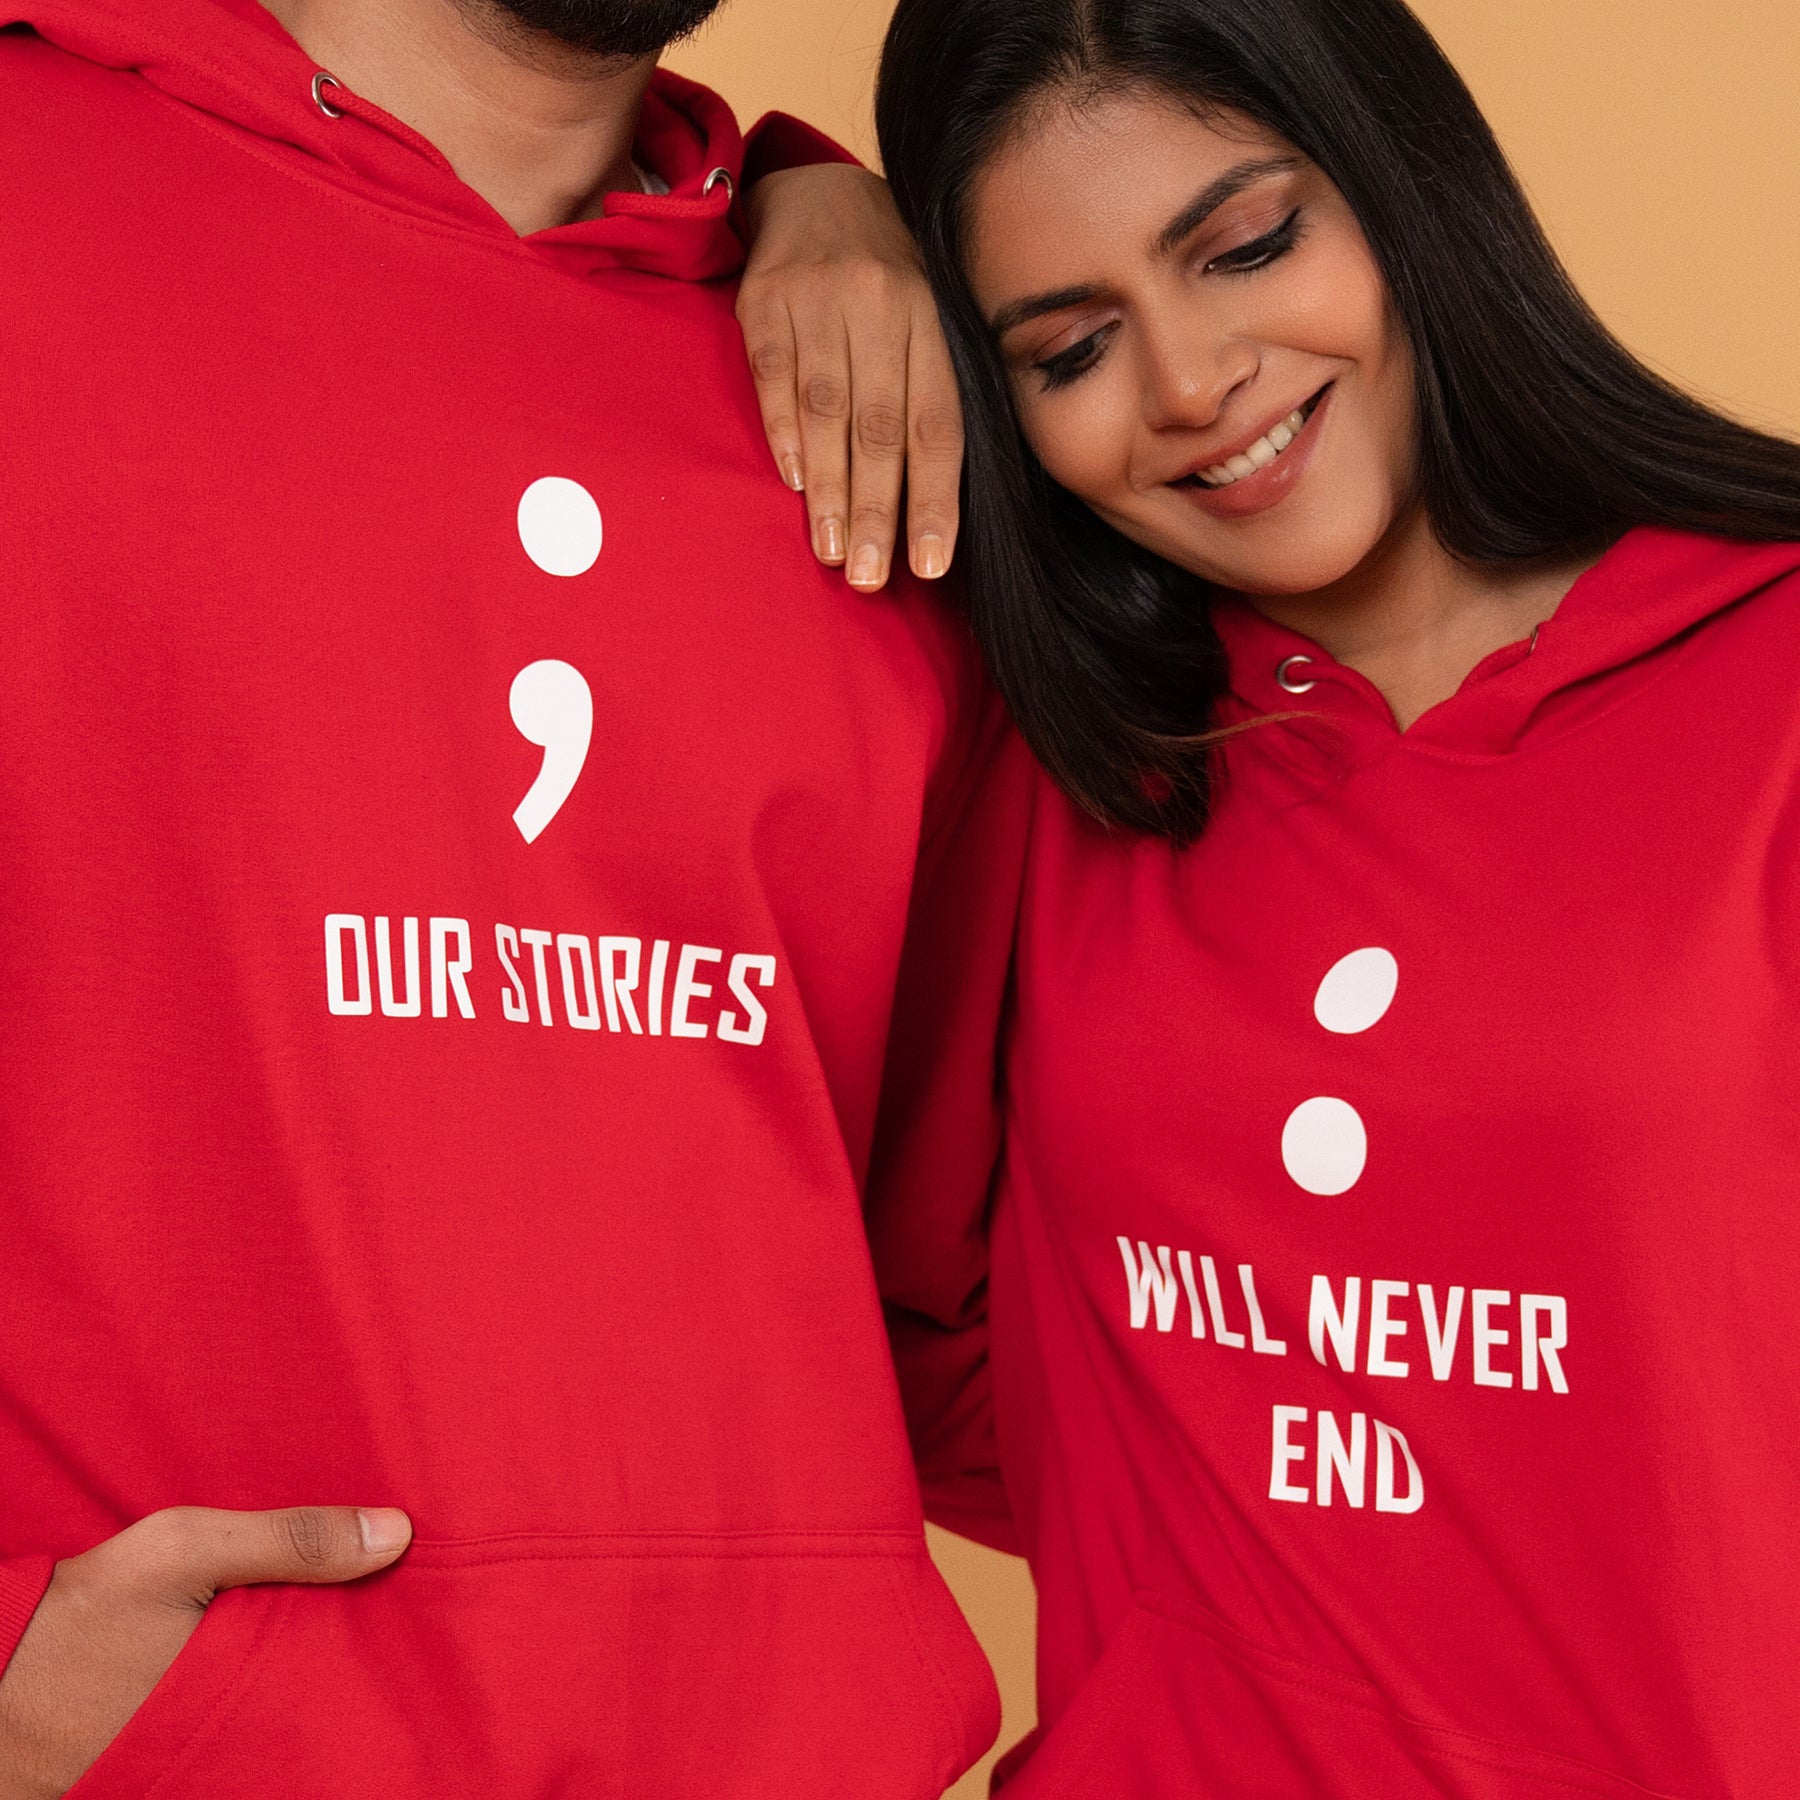 our-stories-will-never-end-red-couple-hoodies-closeup-gogirgit-com_7b69b809-9b52-4a7c-a13d-aa544df10f99